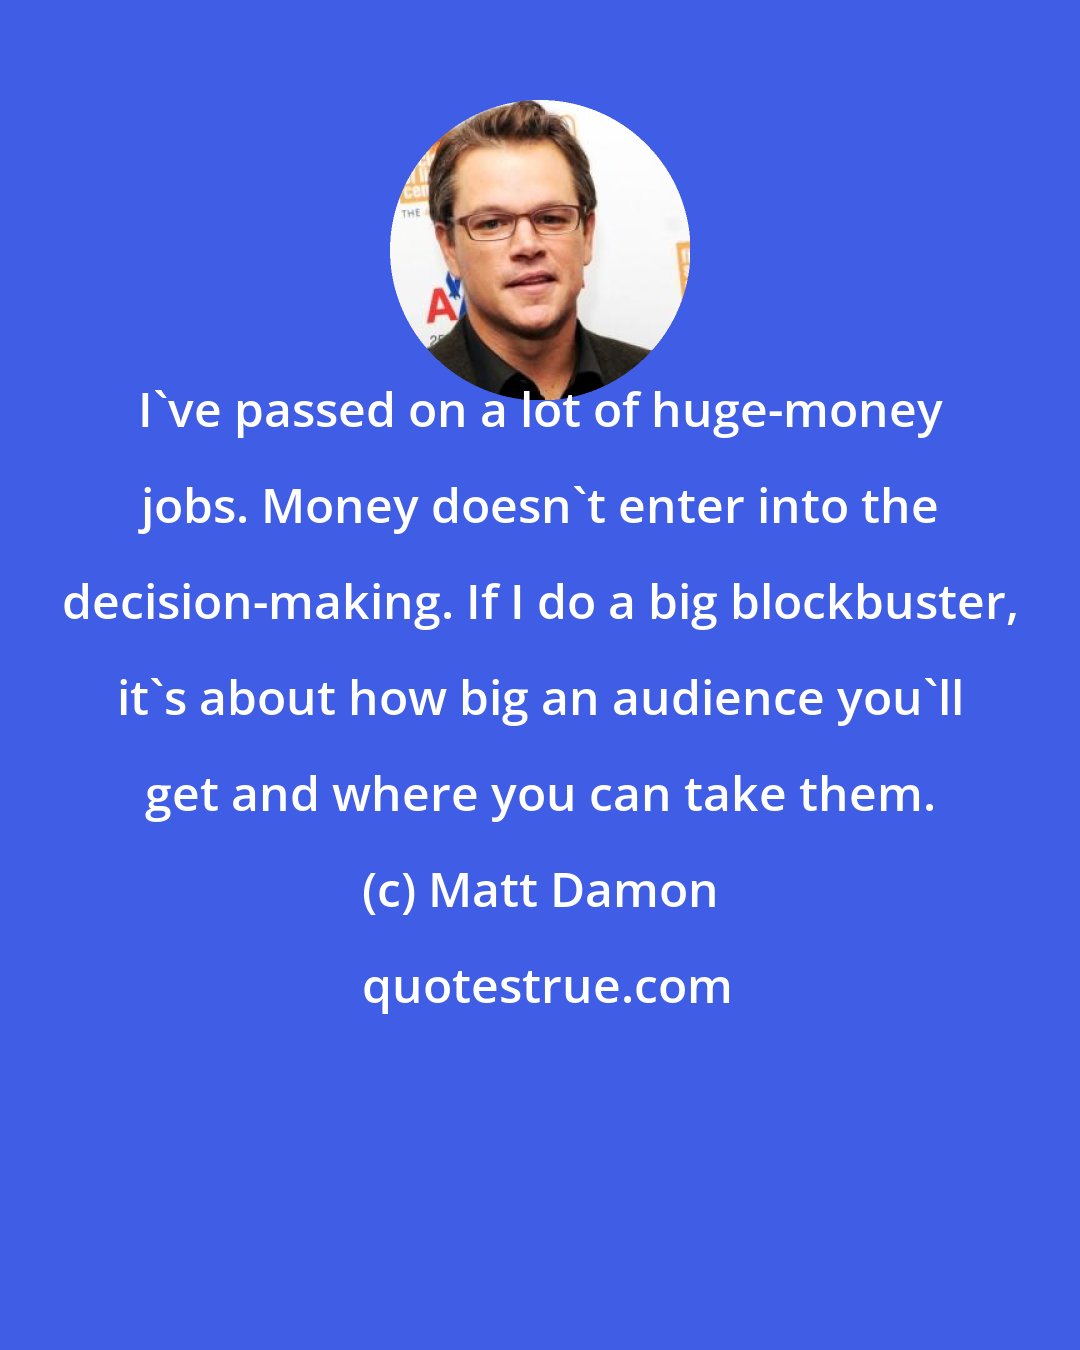 Matt Damon: I've passed on a lot of huge-money jobs. Money doesn't enter into the decision-making. If I do a big blockbuster, it's about how big an audience you'll get and where you can take them.